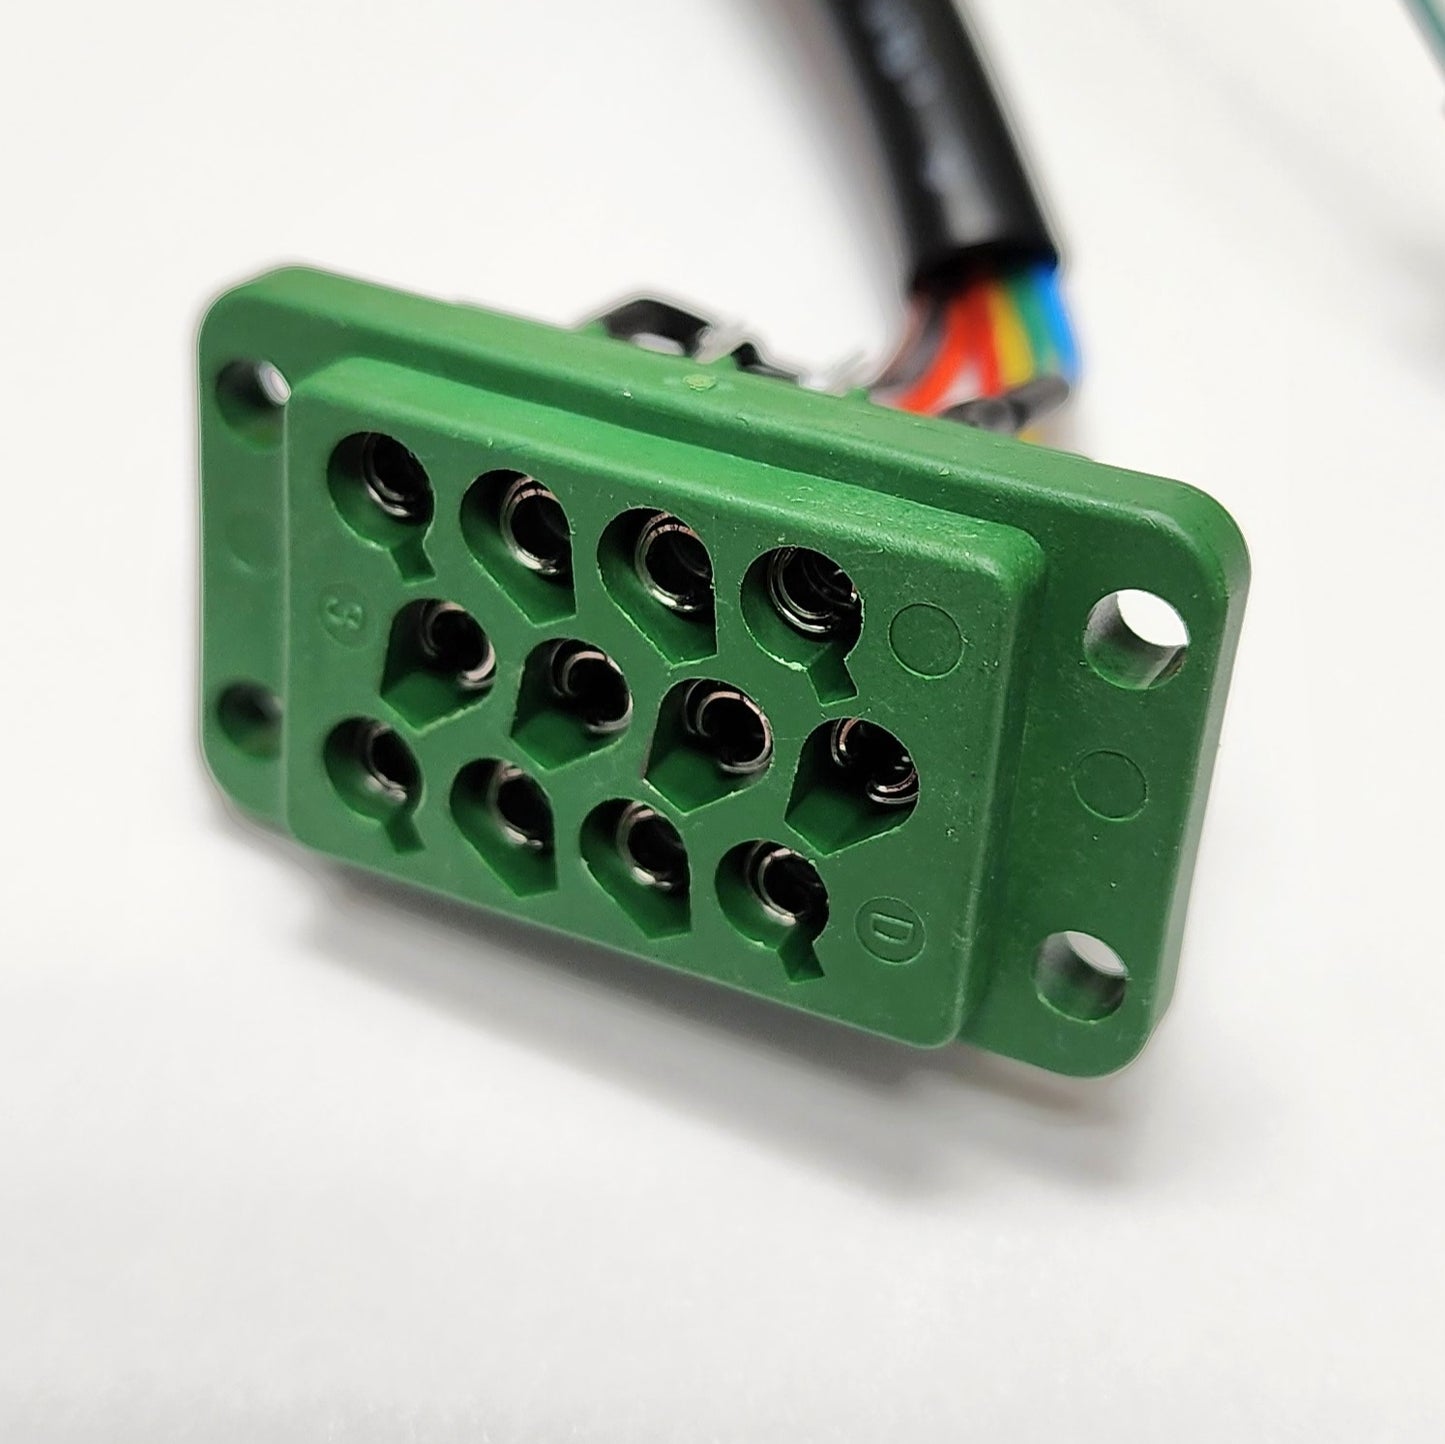 CCT MK4 Harness With Female Connector